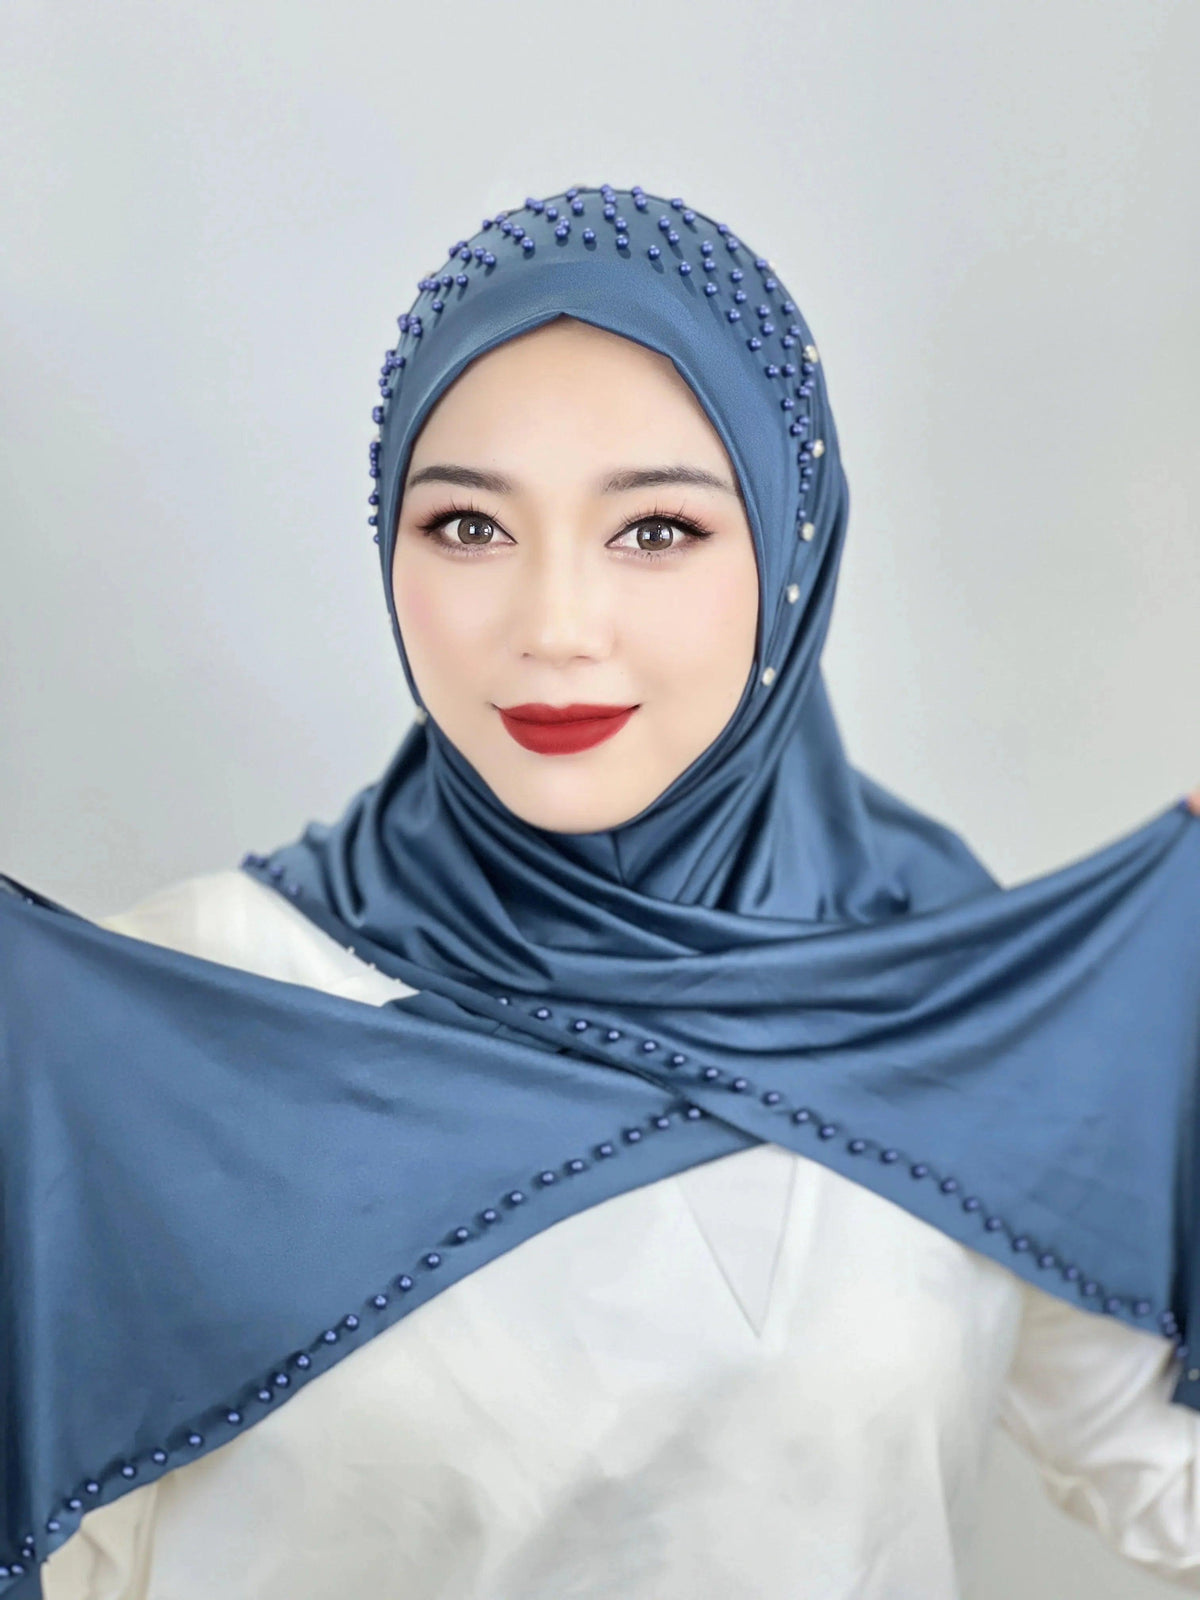 On sale - Muslim Hijab Solid Color - 9 Colours - Free